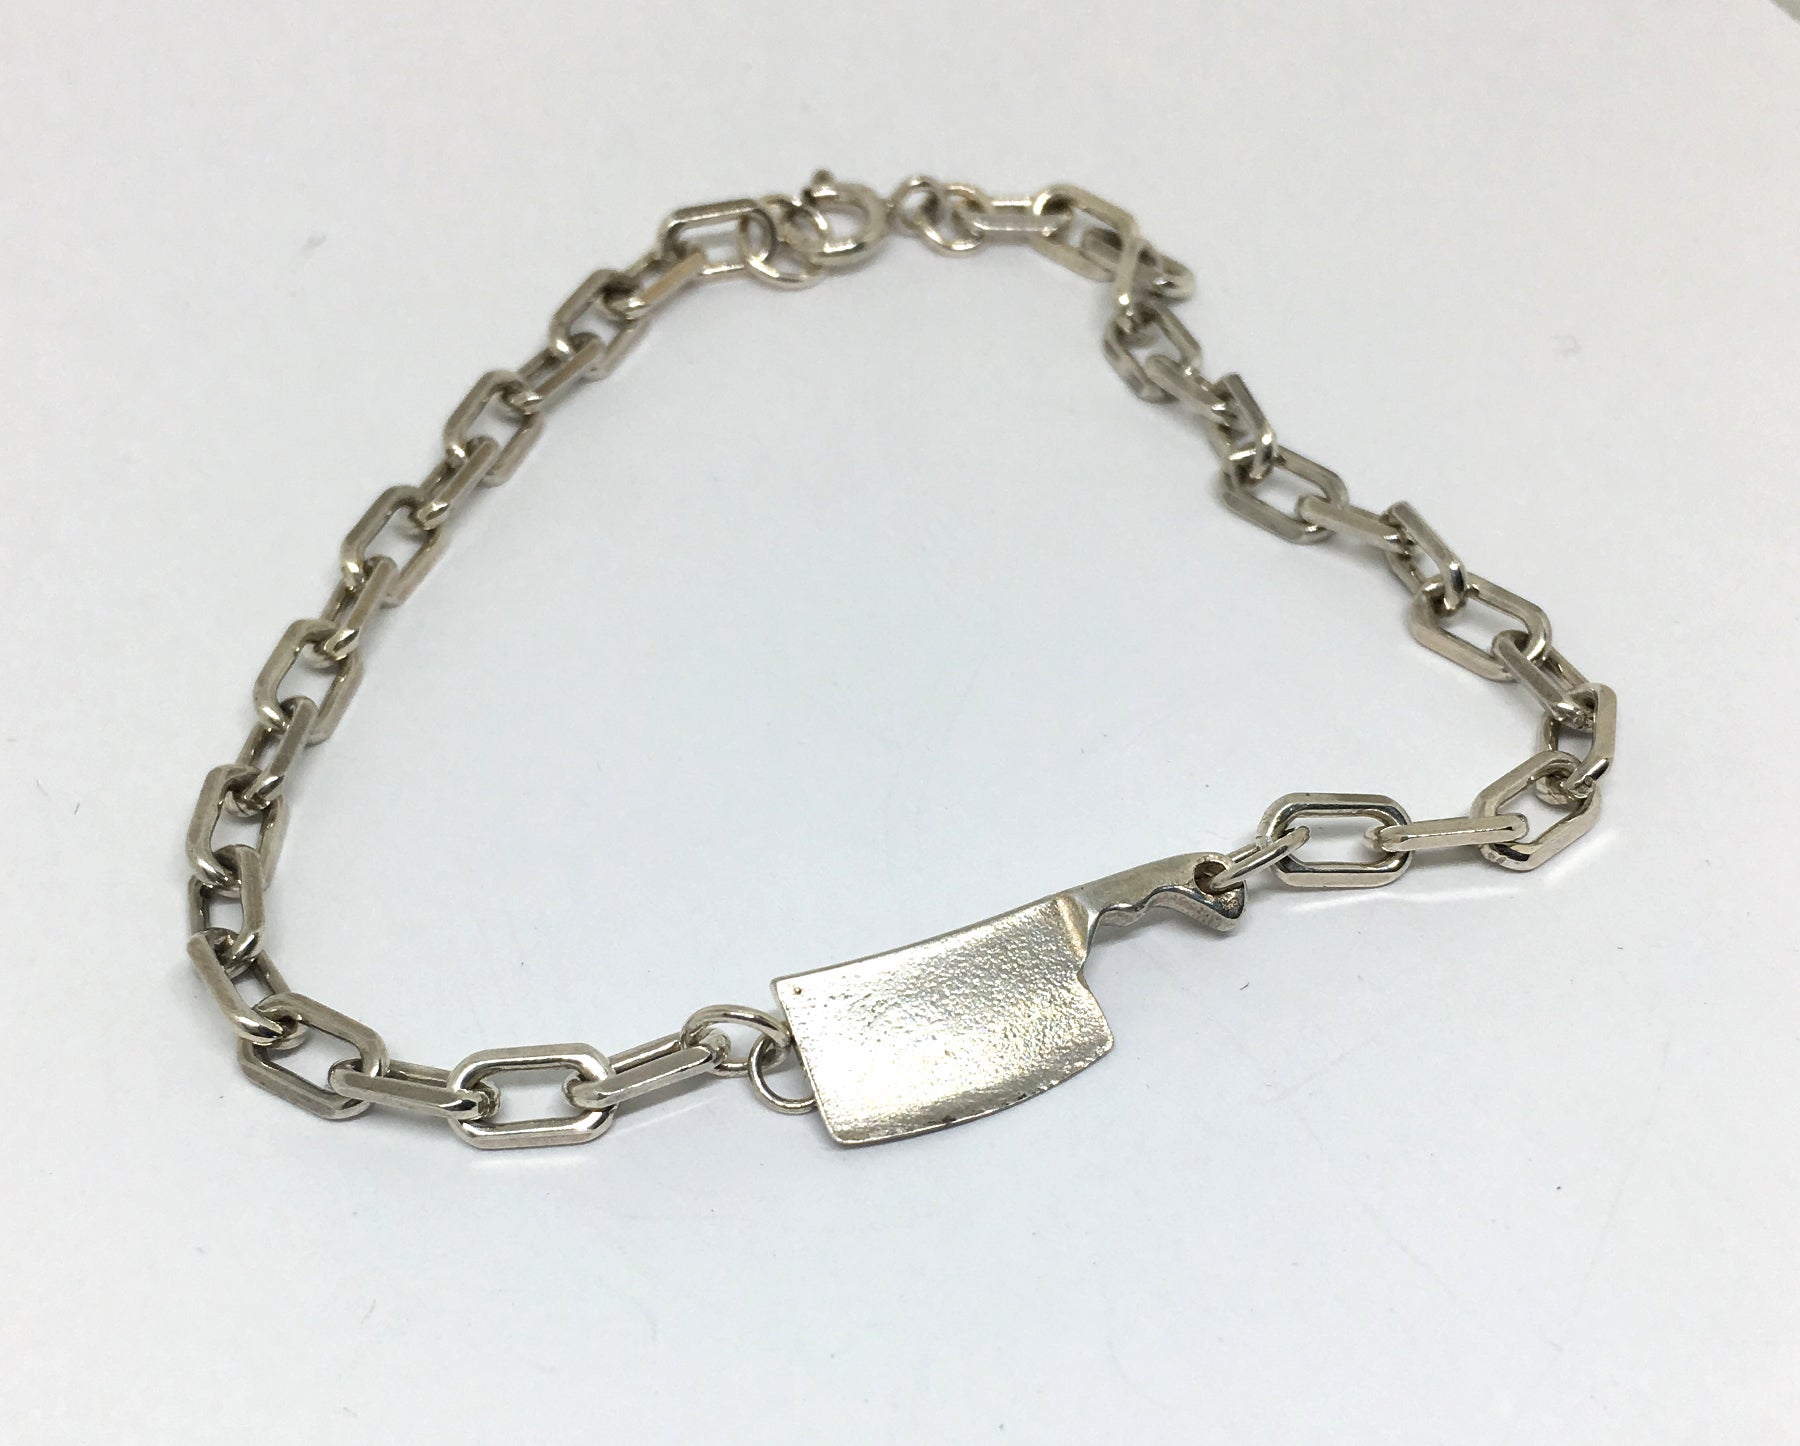 Chefjewelry cleaver chain bracelet